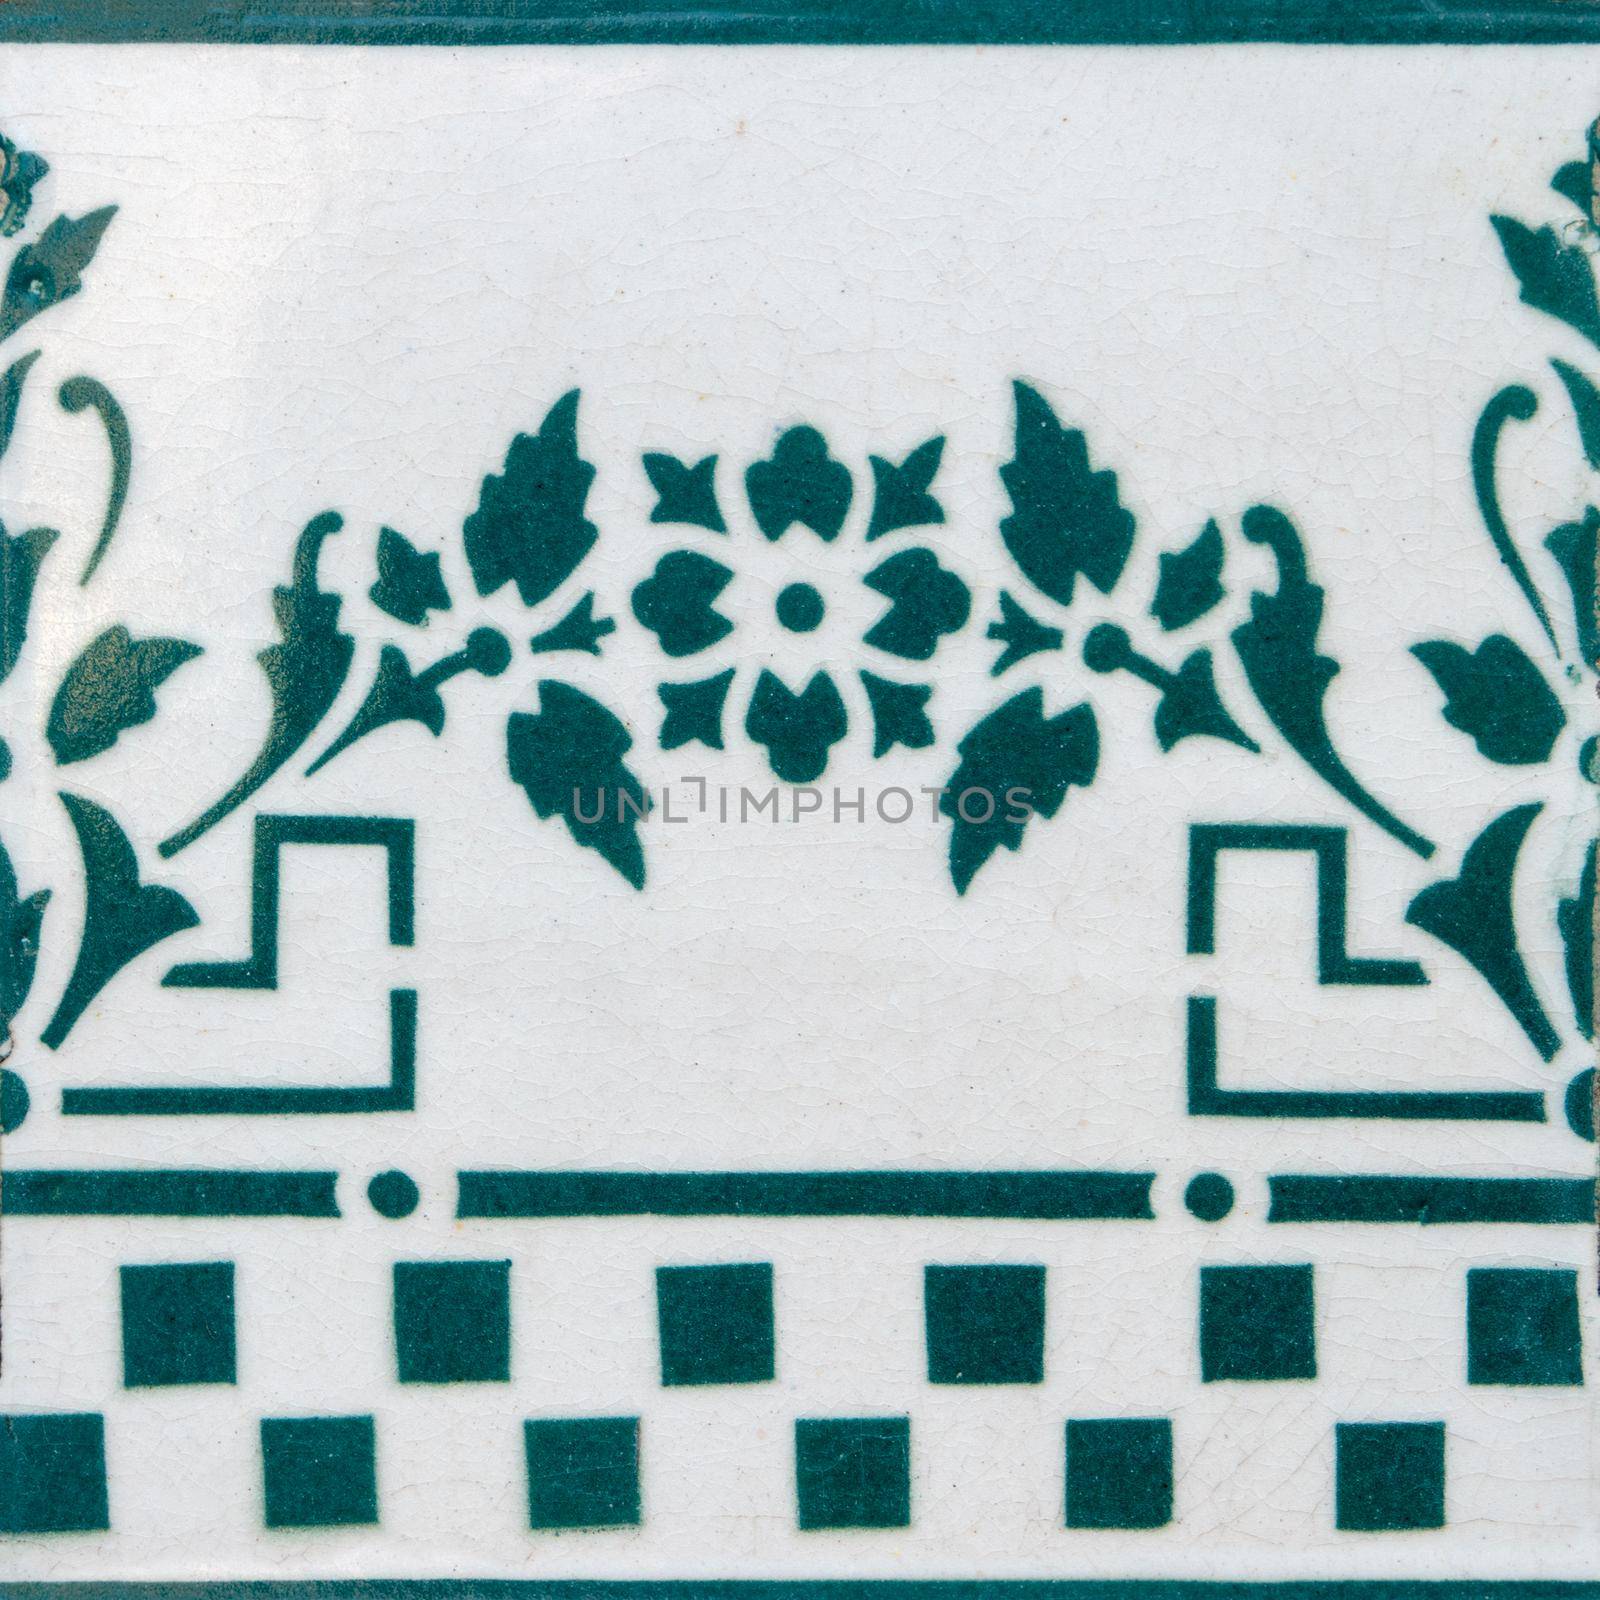 Traditional spanish ceramic tiles in yellow, white and blue